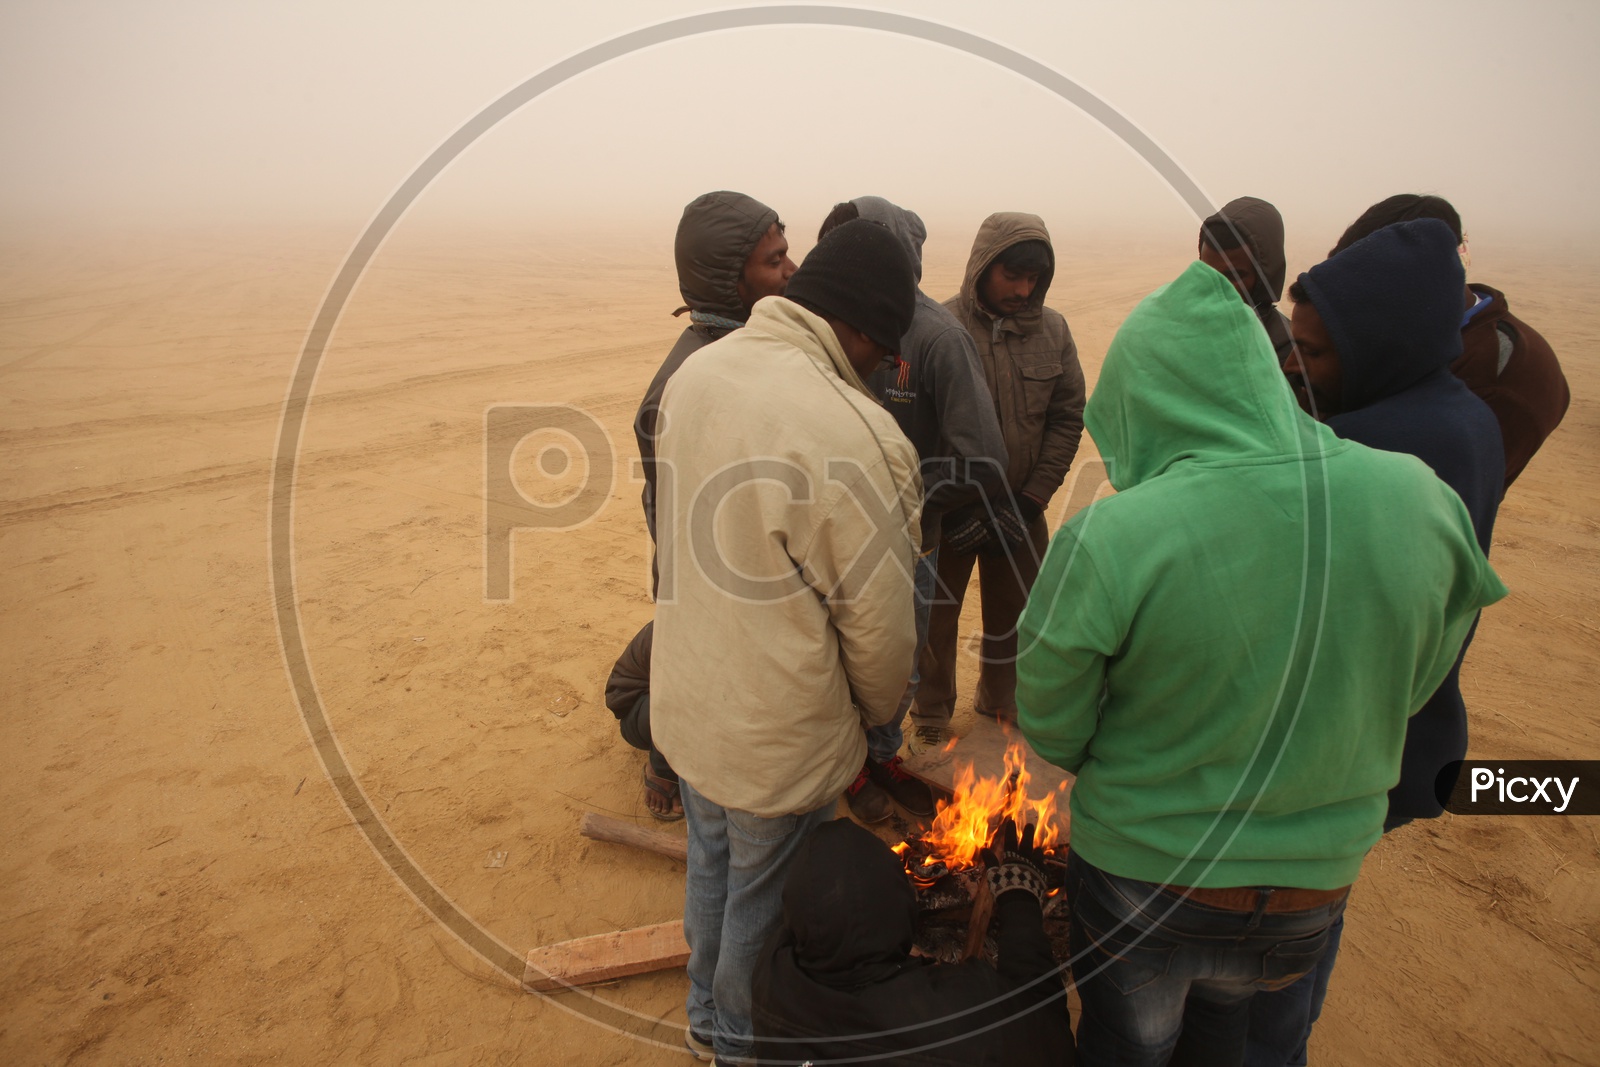 People in a desert with camp Fire